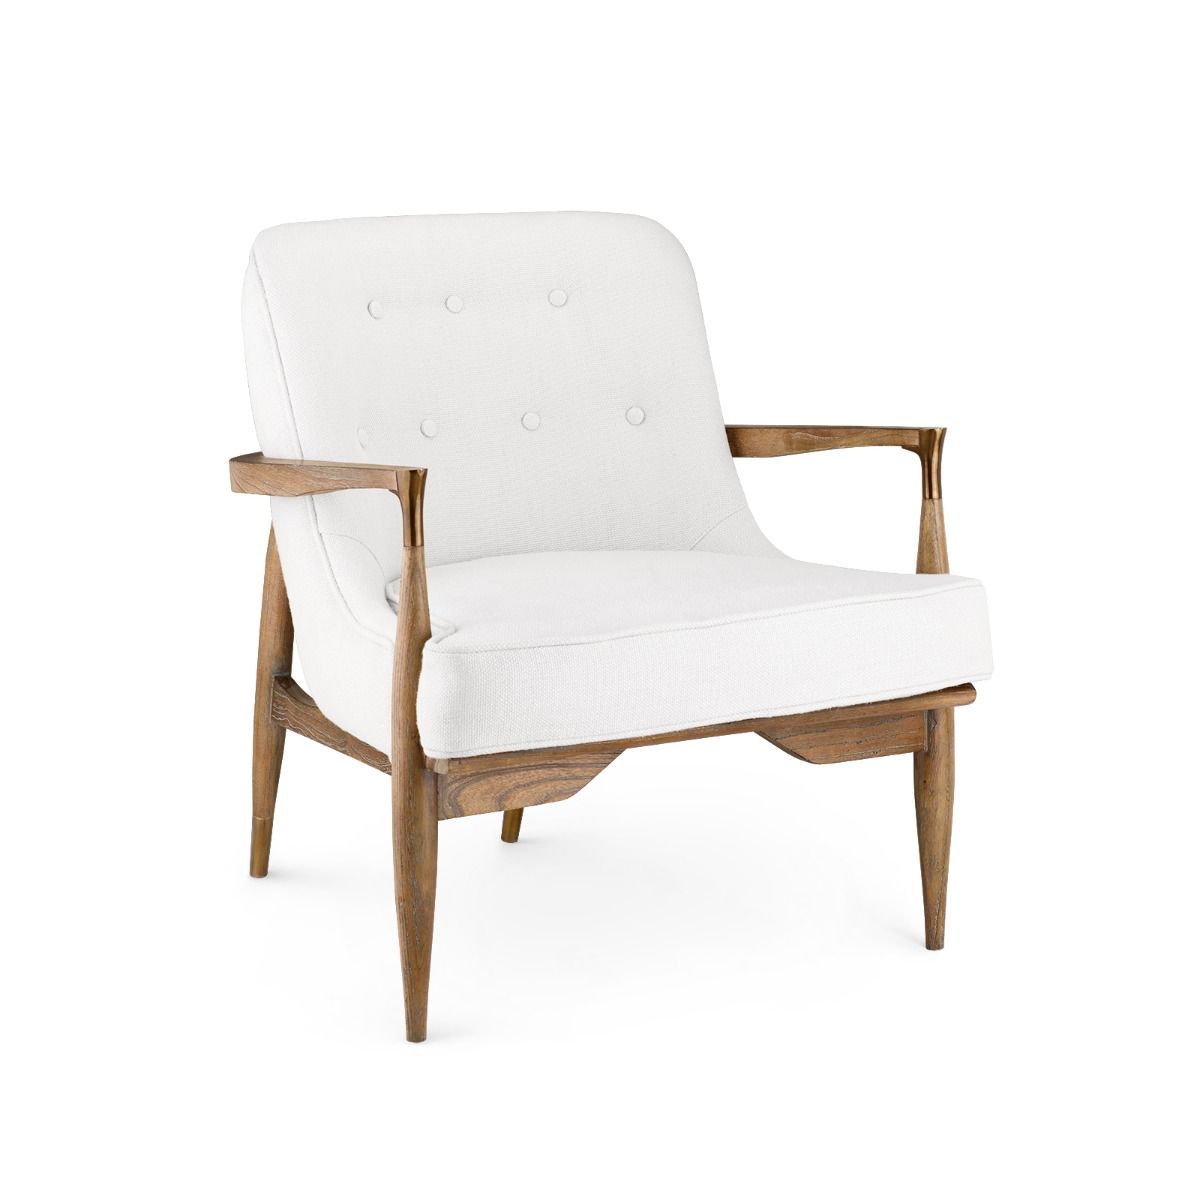 Load image into Gallery viewer, Frans Lounge Chair, Driftwood Lounge Chair Bungalow 5     Four Hands, Burke Decor, Mid Century Modern Furniture, Old Bones Furniture Company, Old Bones Co, Modern Mid Century, Designer Furniture, https://www.oldbonesco.com/
